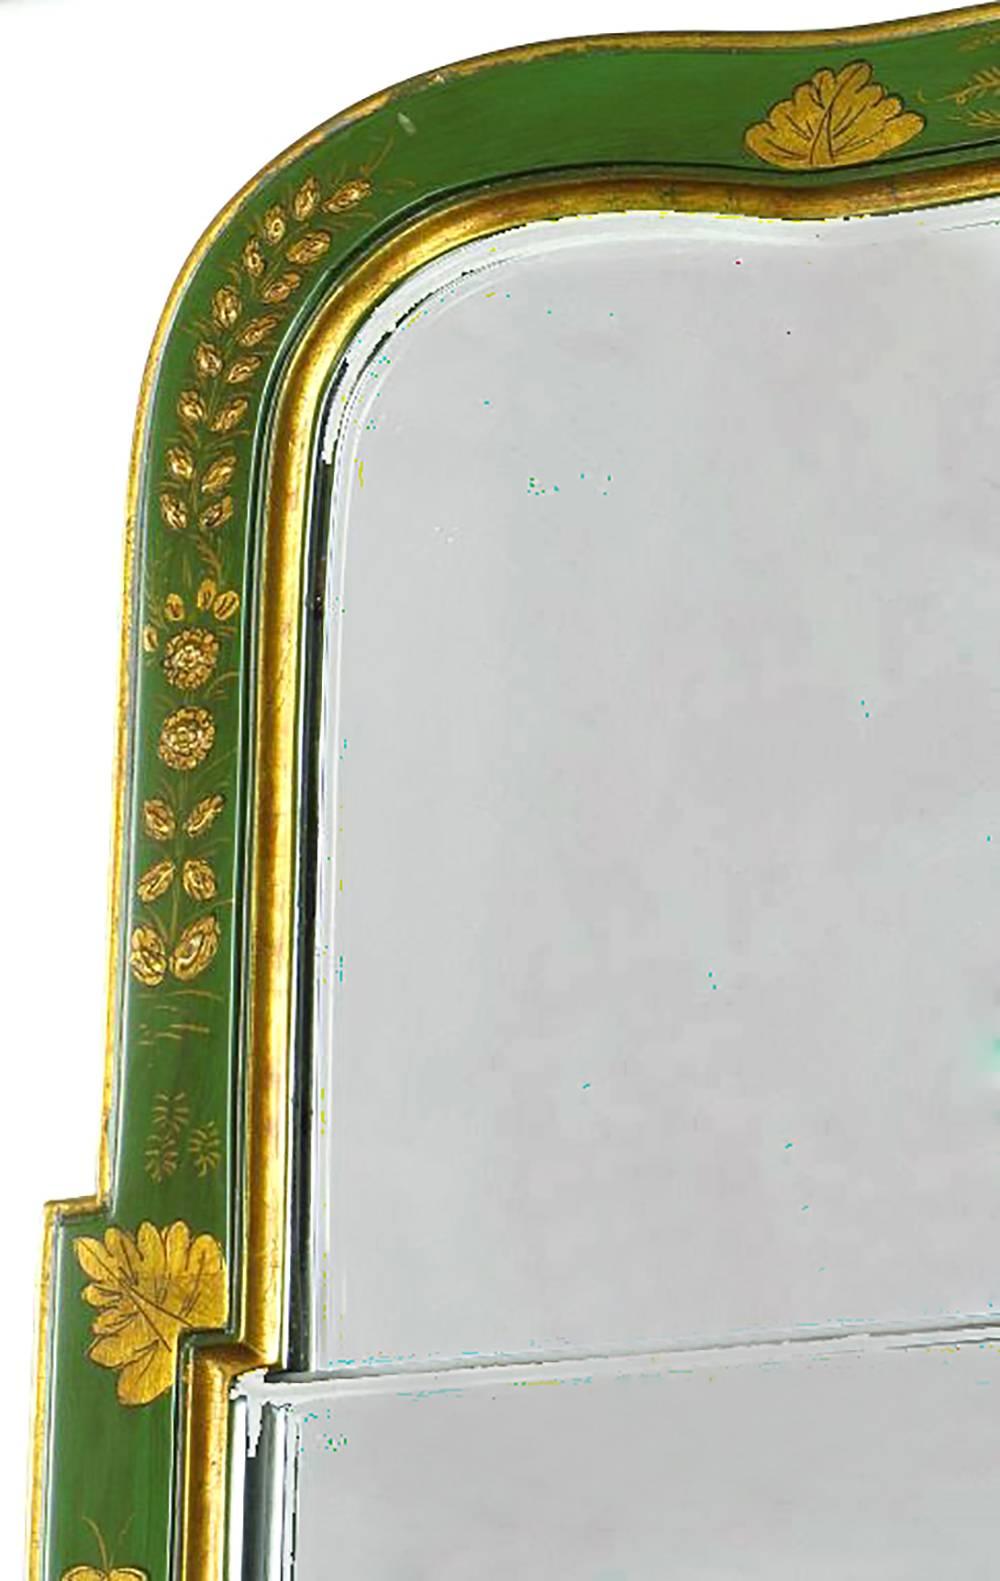 Authorized by the Colonial Williamsburg Foundation and crafted by Friedman Brothers, fine mirror maker to the trade, this classic two-piece mirror in an emerald green lacquered wood frame with gilt Chinese characters, foliage and borders.